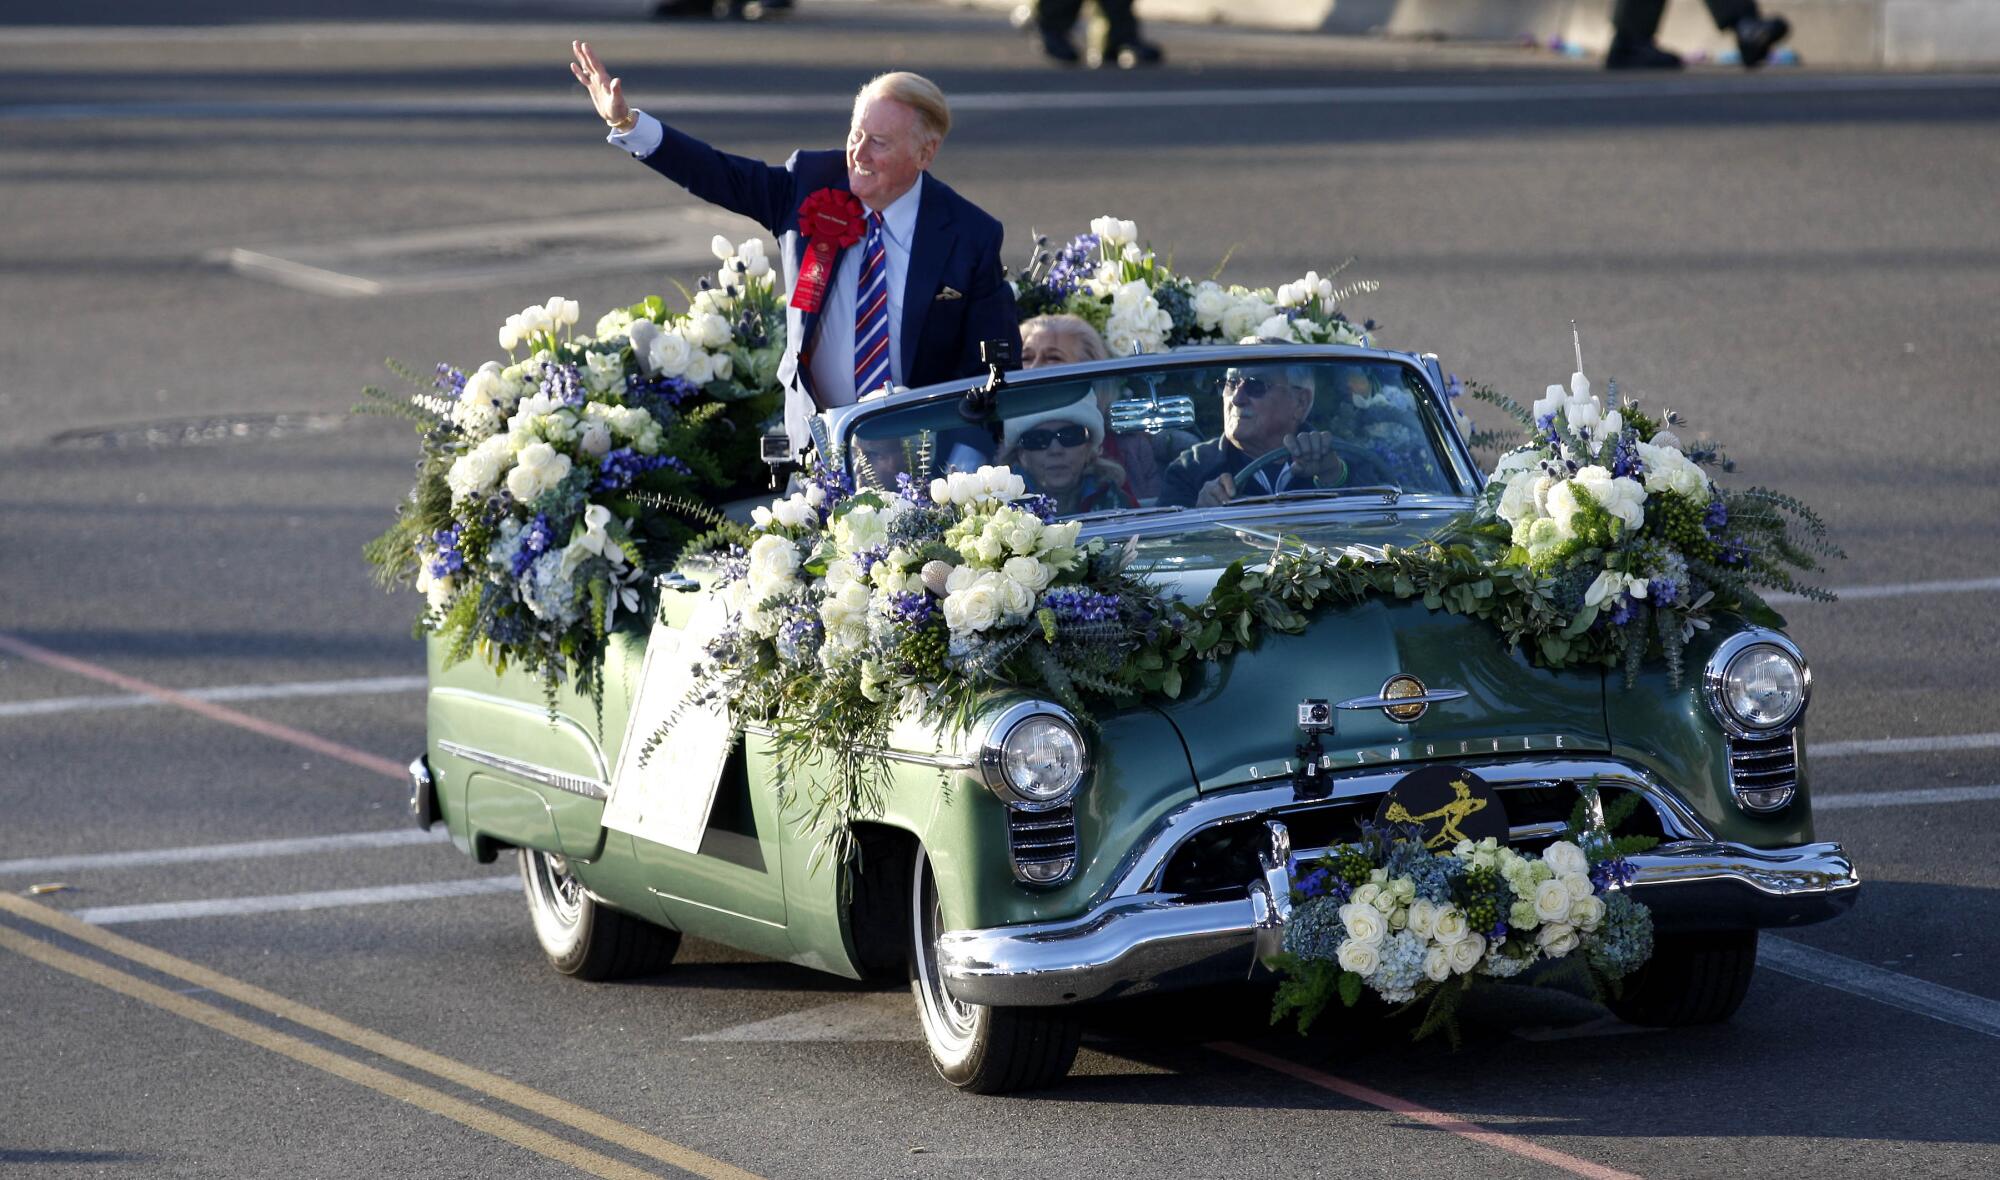 Dodgers broadcaster and Rose Parade grand marshal Vin Scully waves to the fans during the 125th Rose Parade on Jan. 1, 2014.